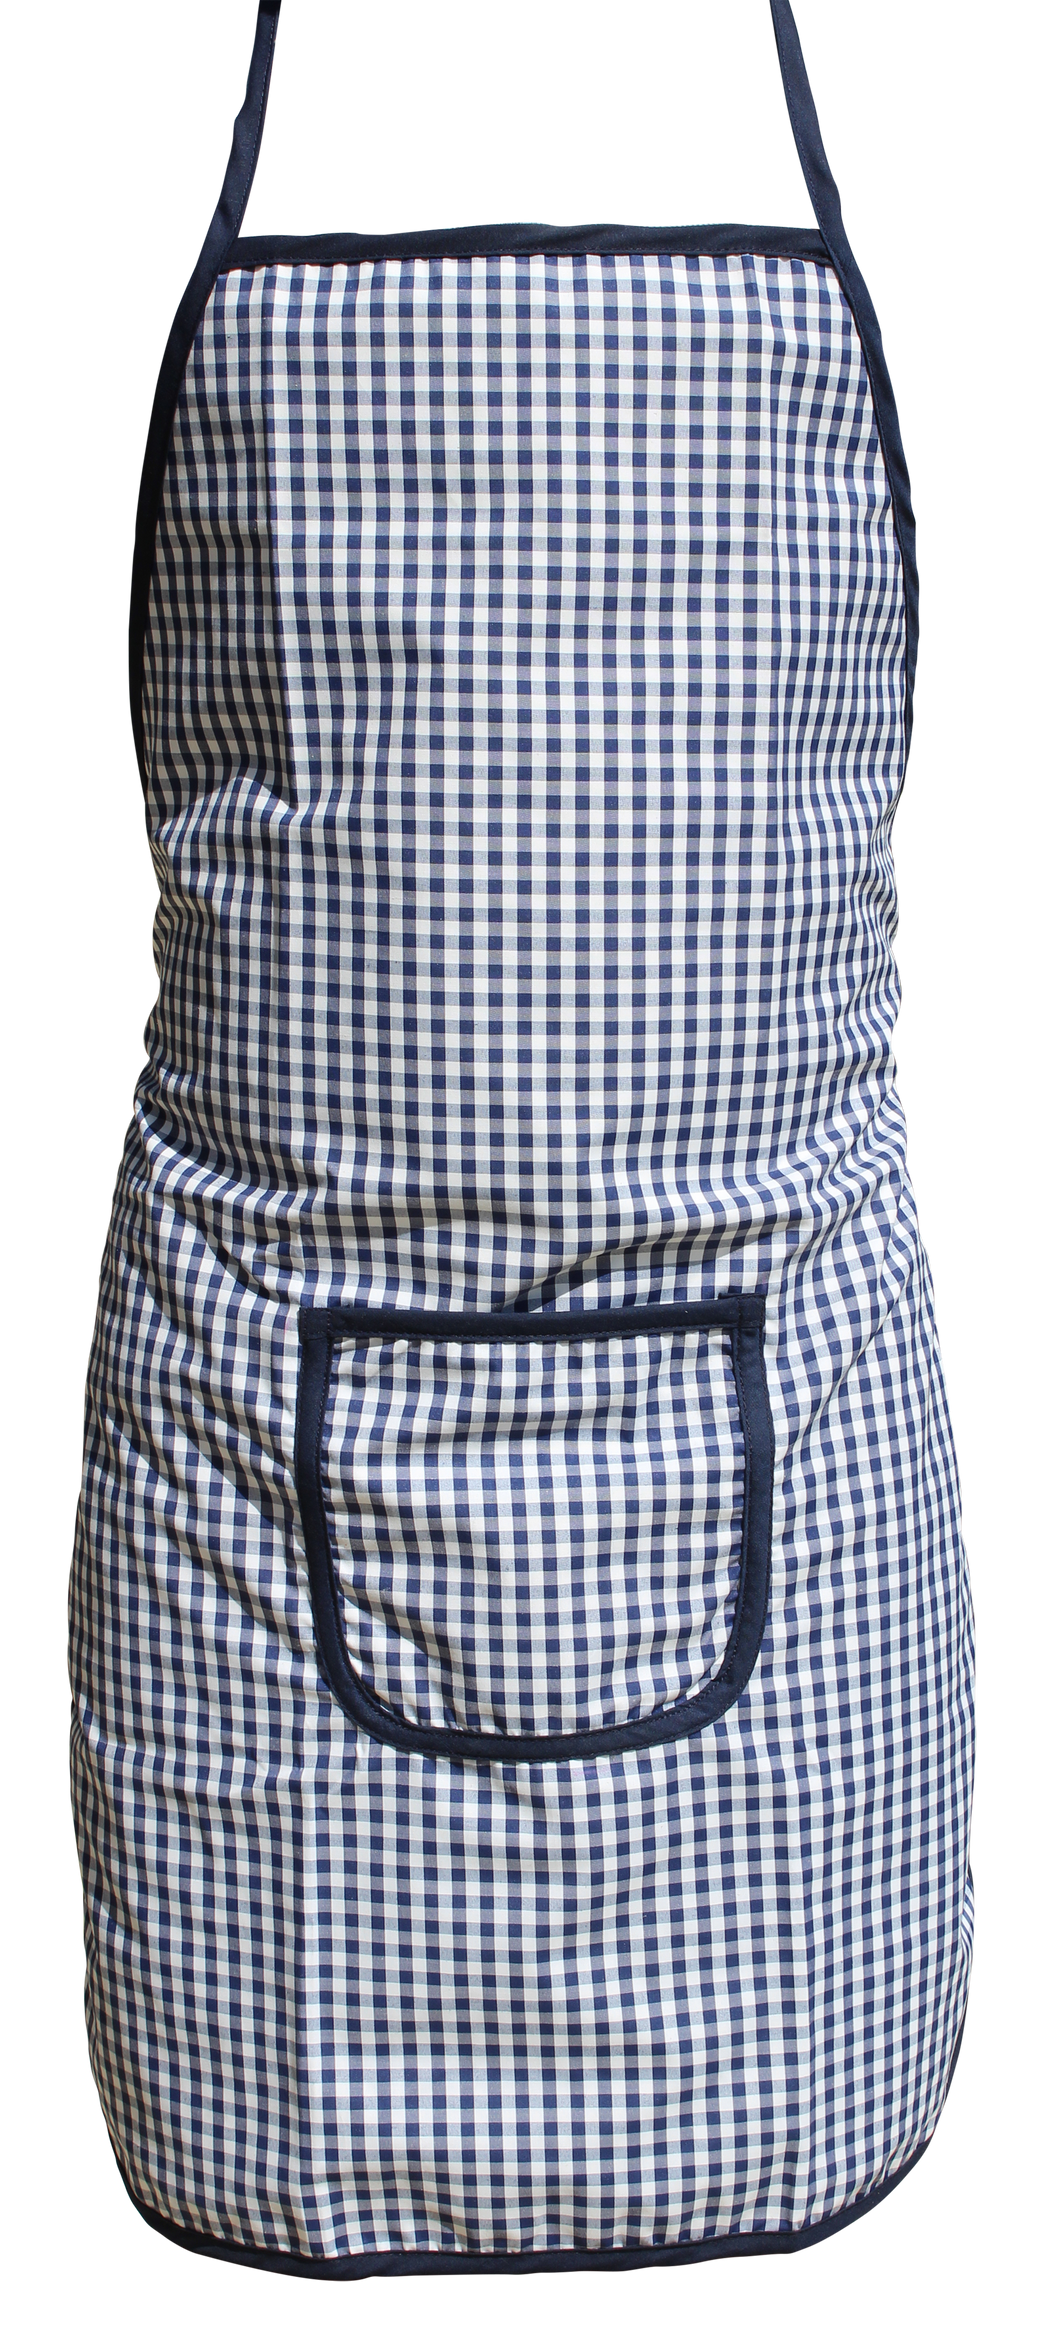 Gab Home Long Aprons - Available in several colors